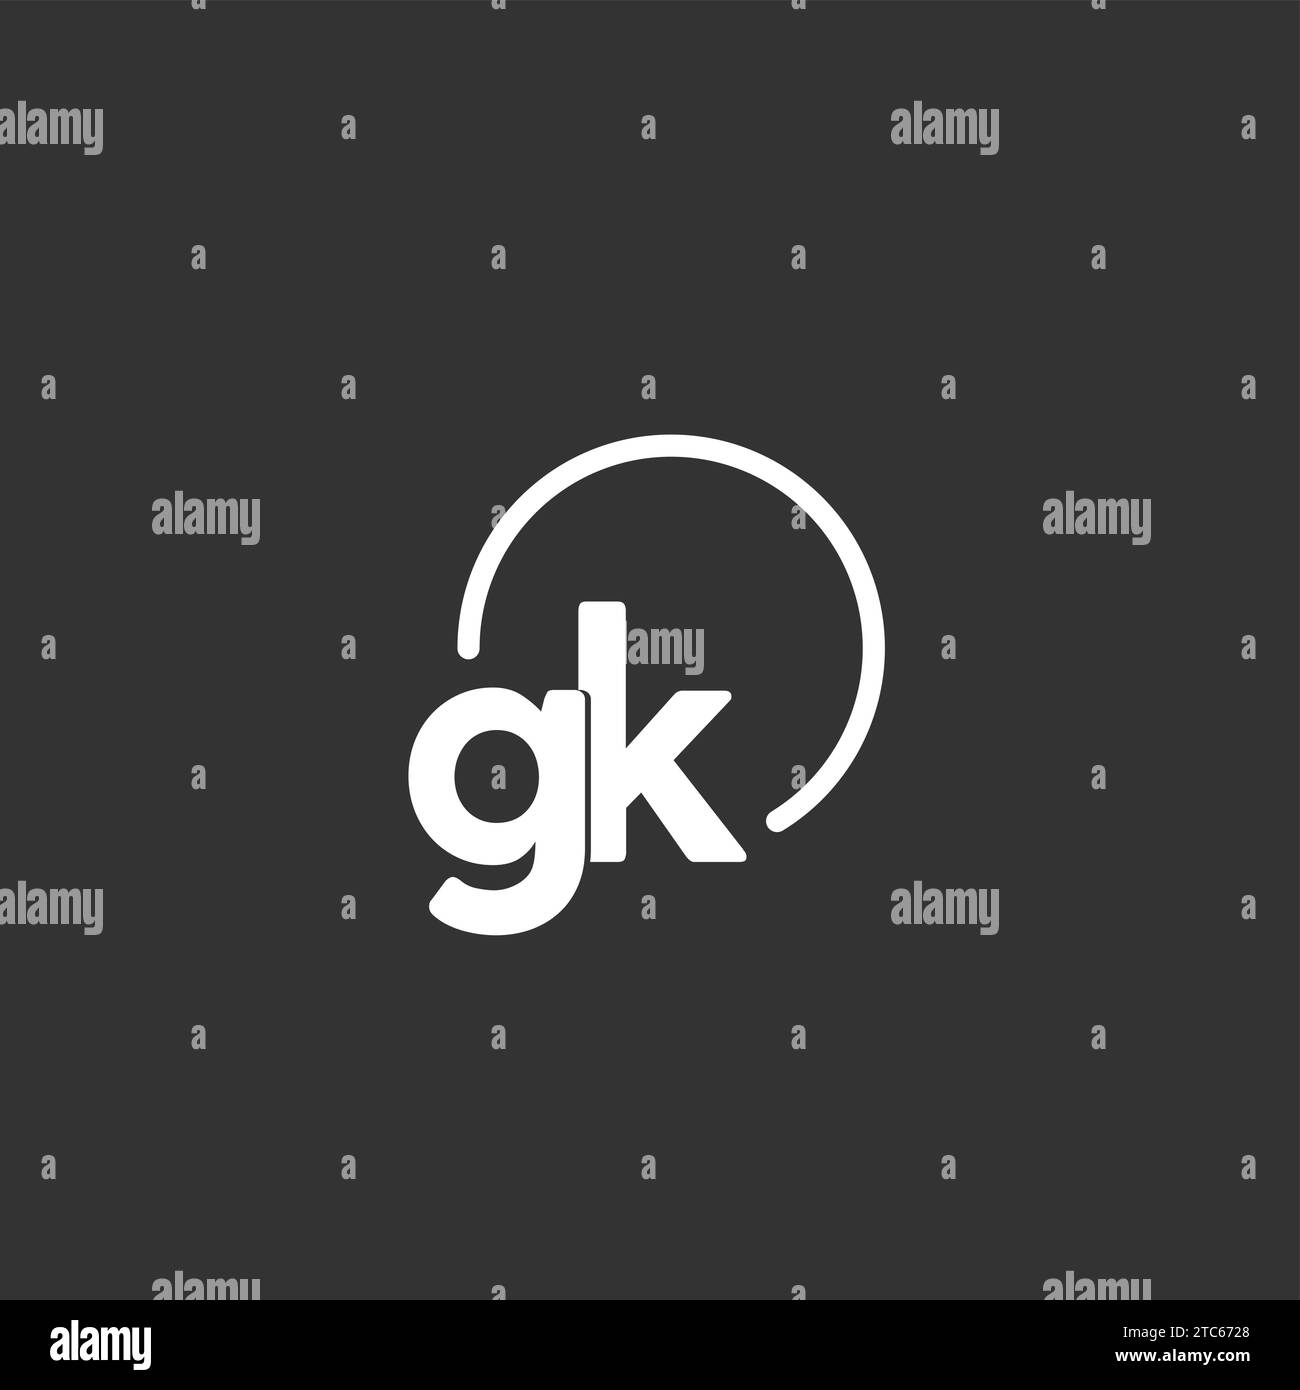 Gk Initial Logo With Rounded Circle Vector Graphic Stock Vector Image